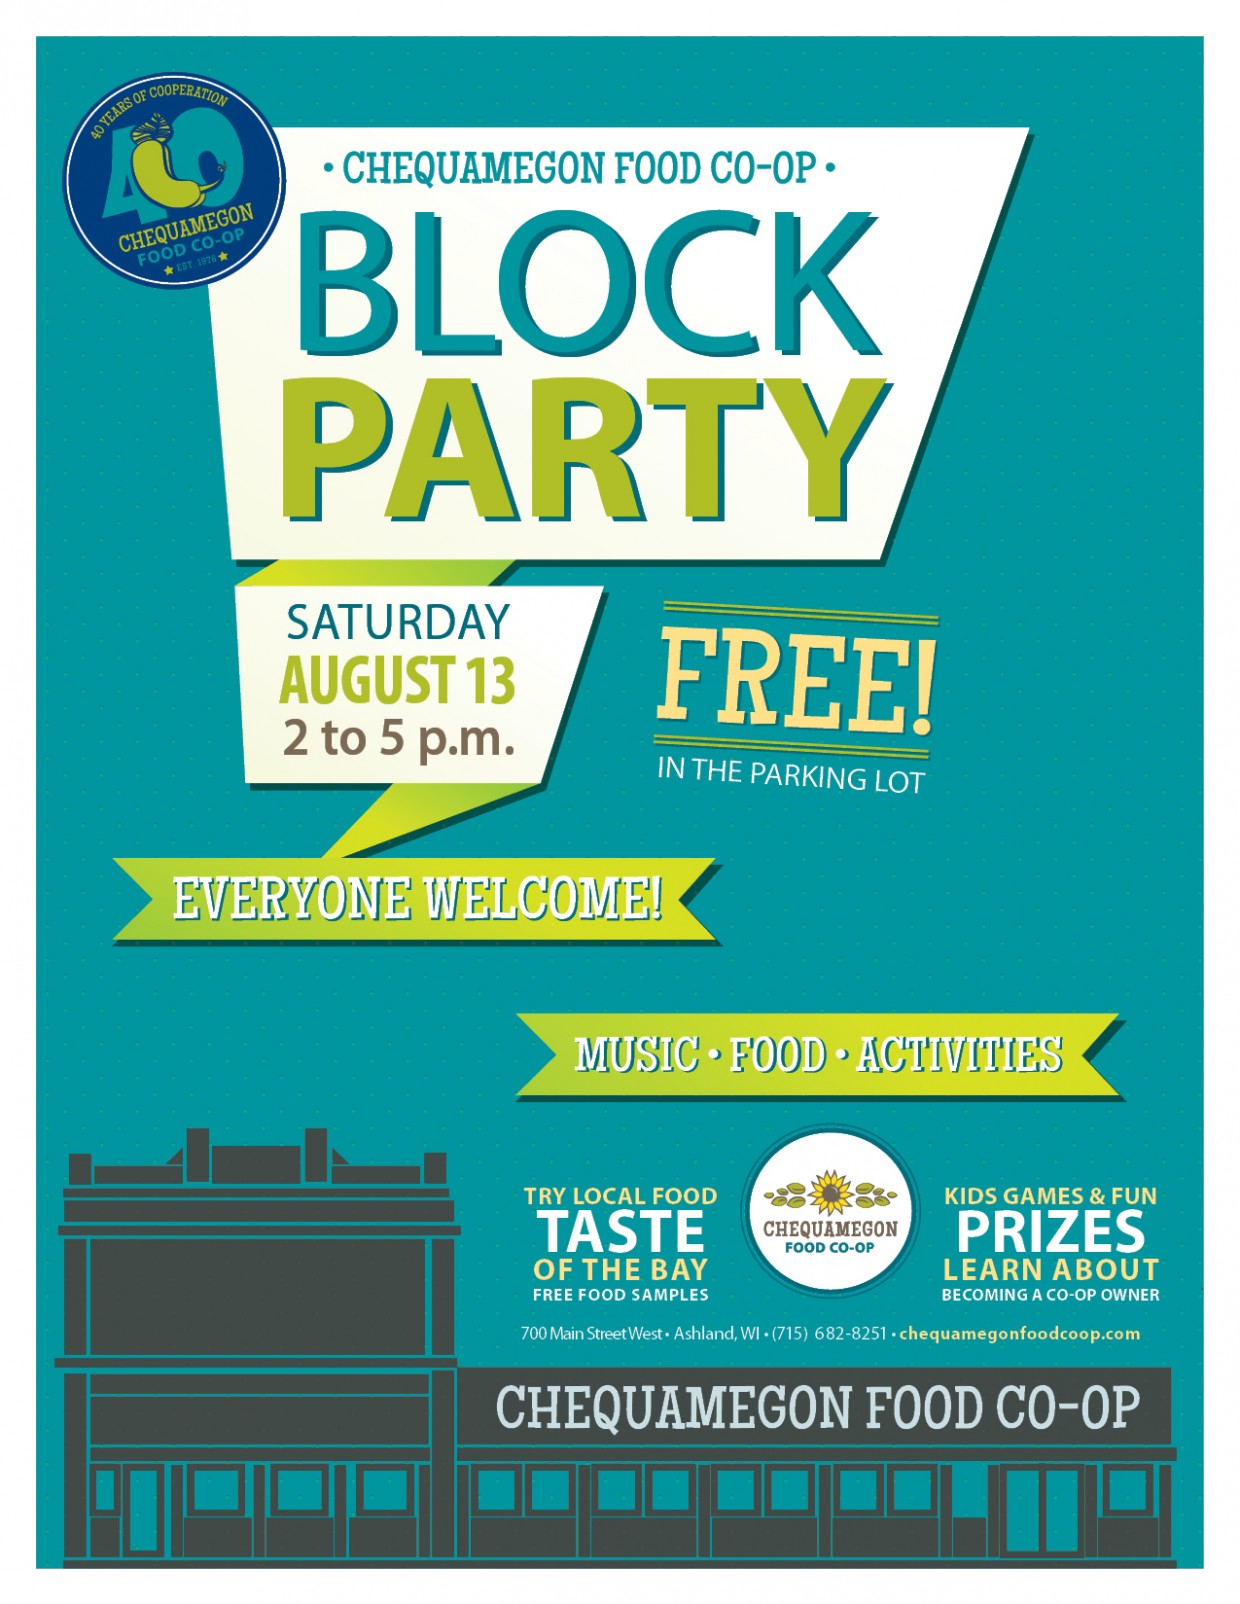 Let’s Party: Free Food, Music & More!